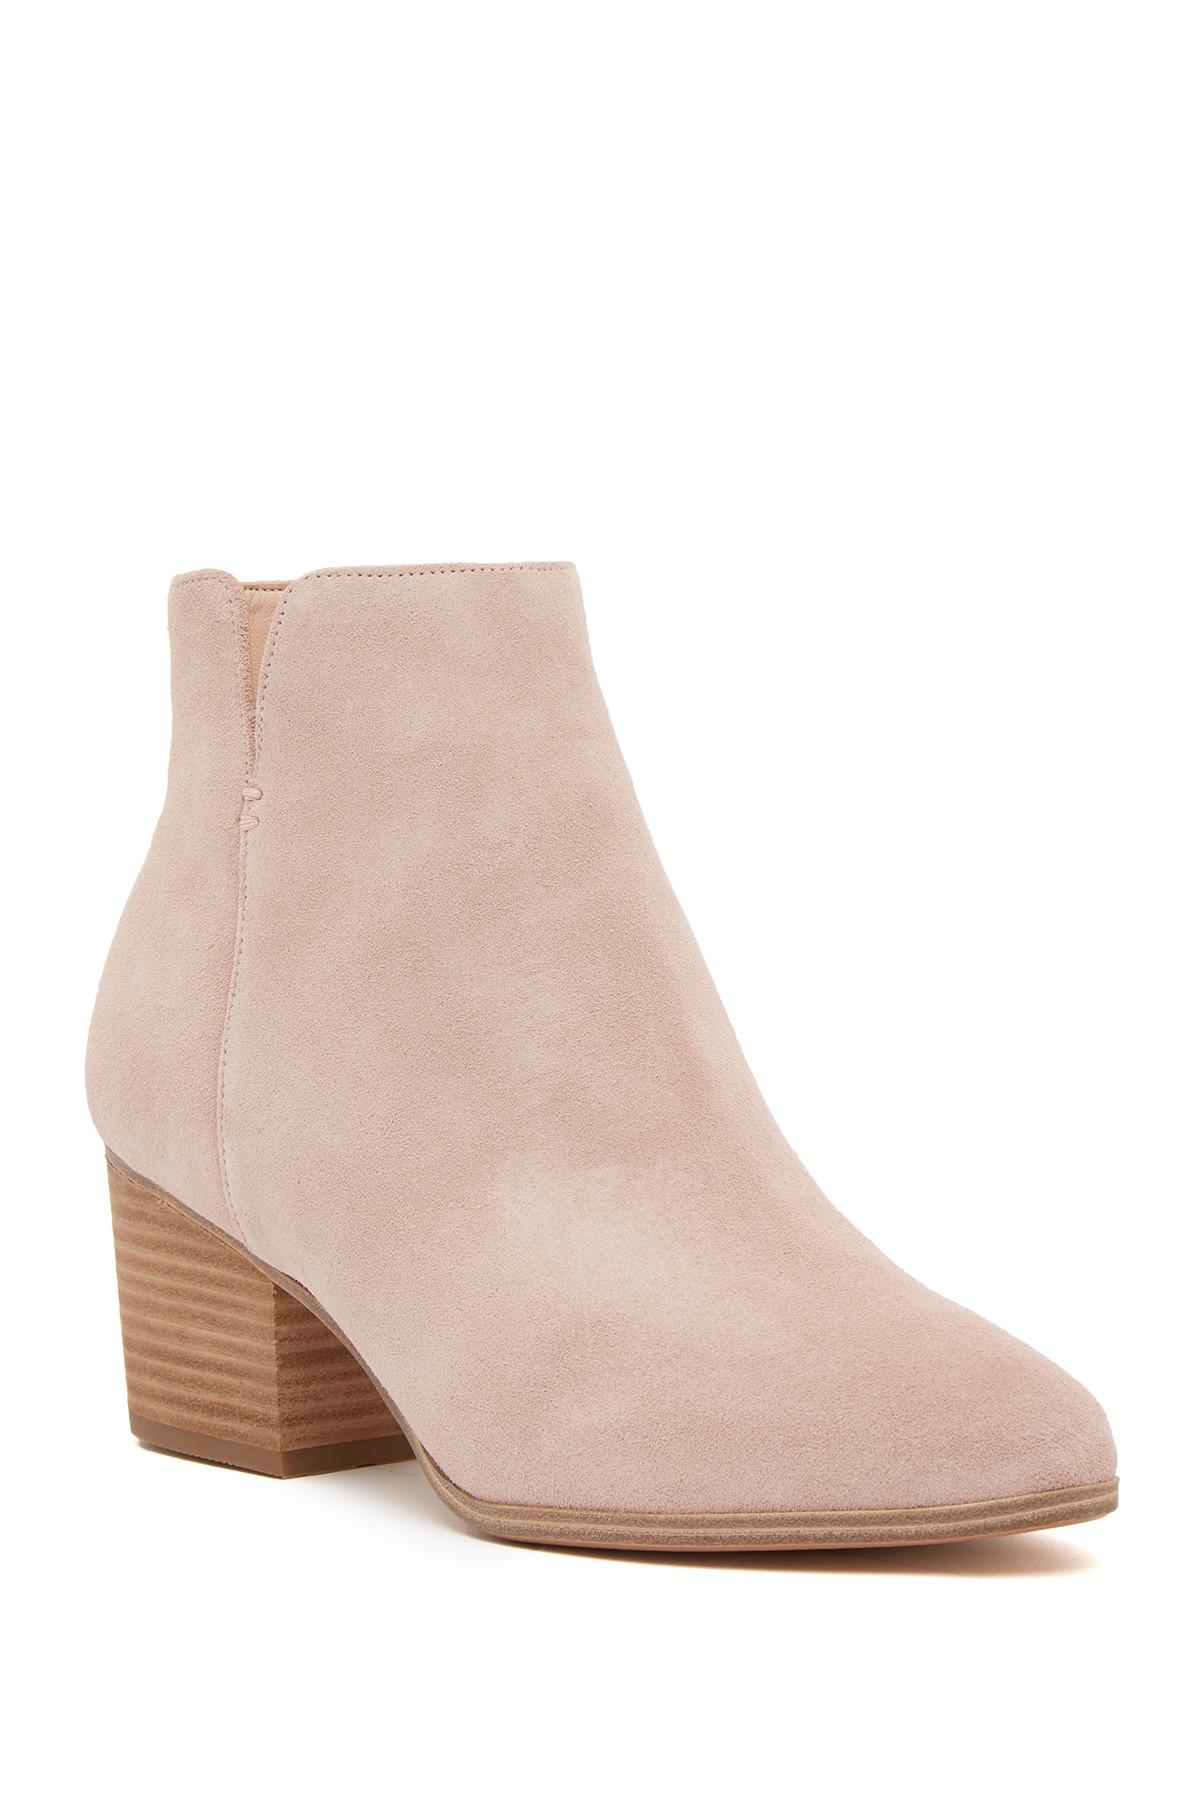 ALDO Sevi Suede Ankle Boot in Light Pink (Pink) - Lyst